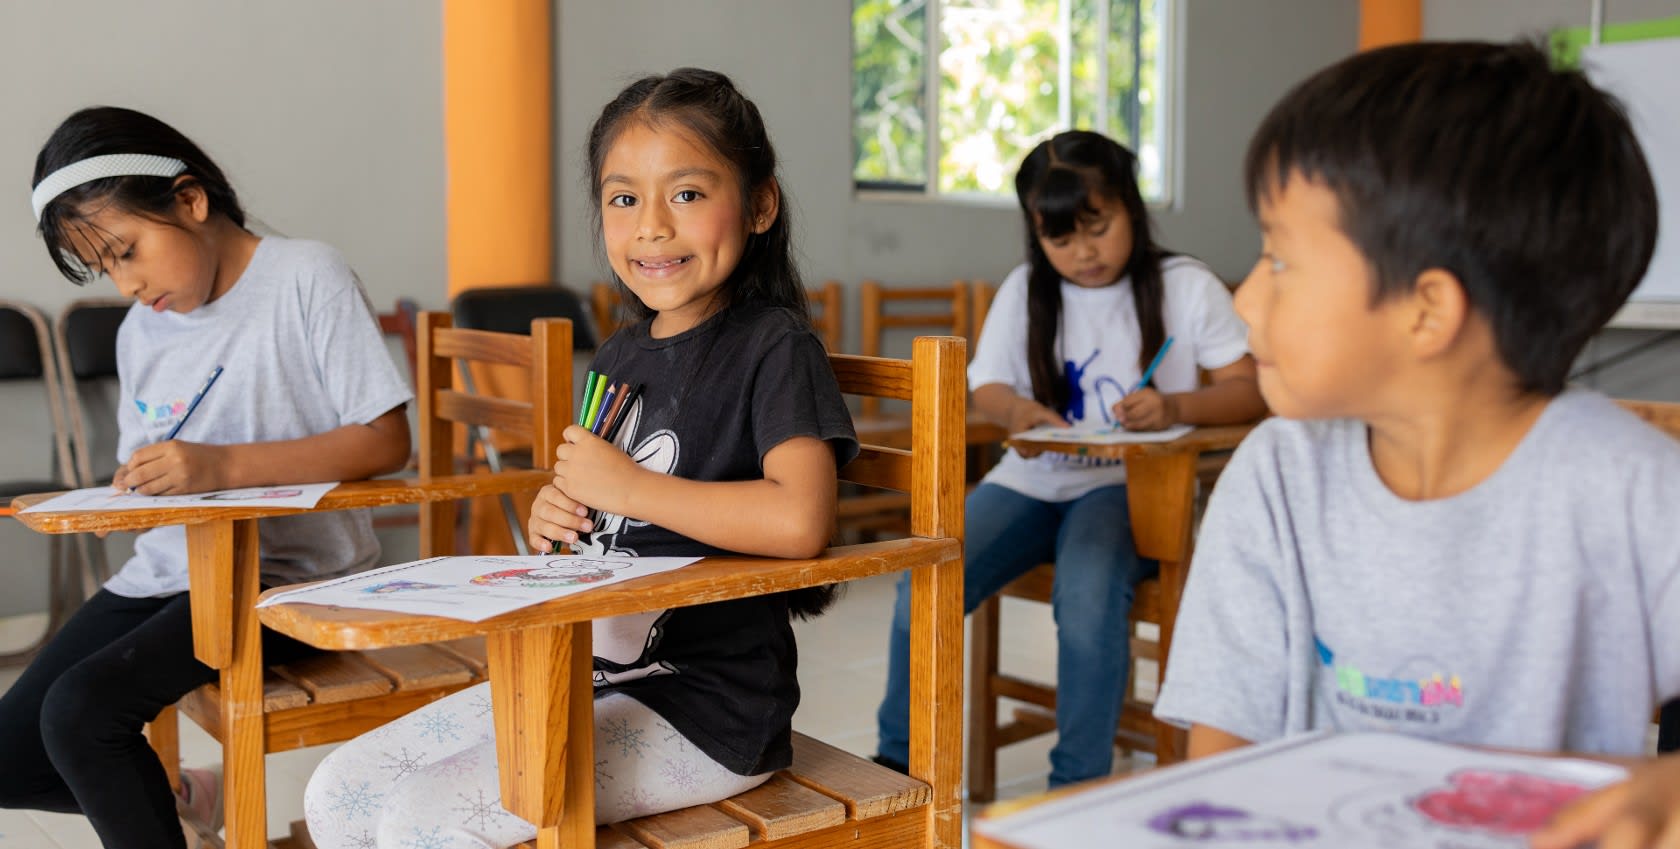 A young girl sitting in a classroom with her classmates, drawing together.